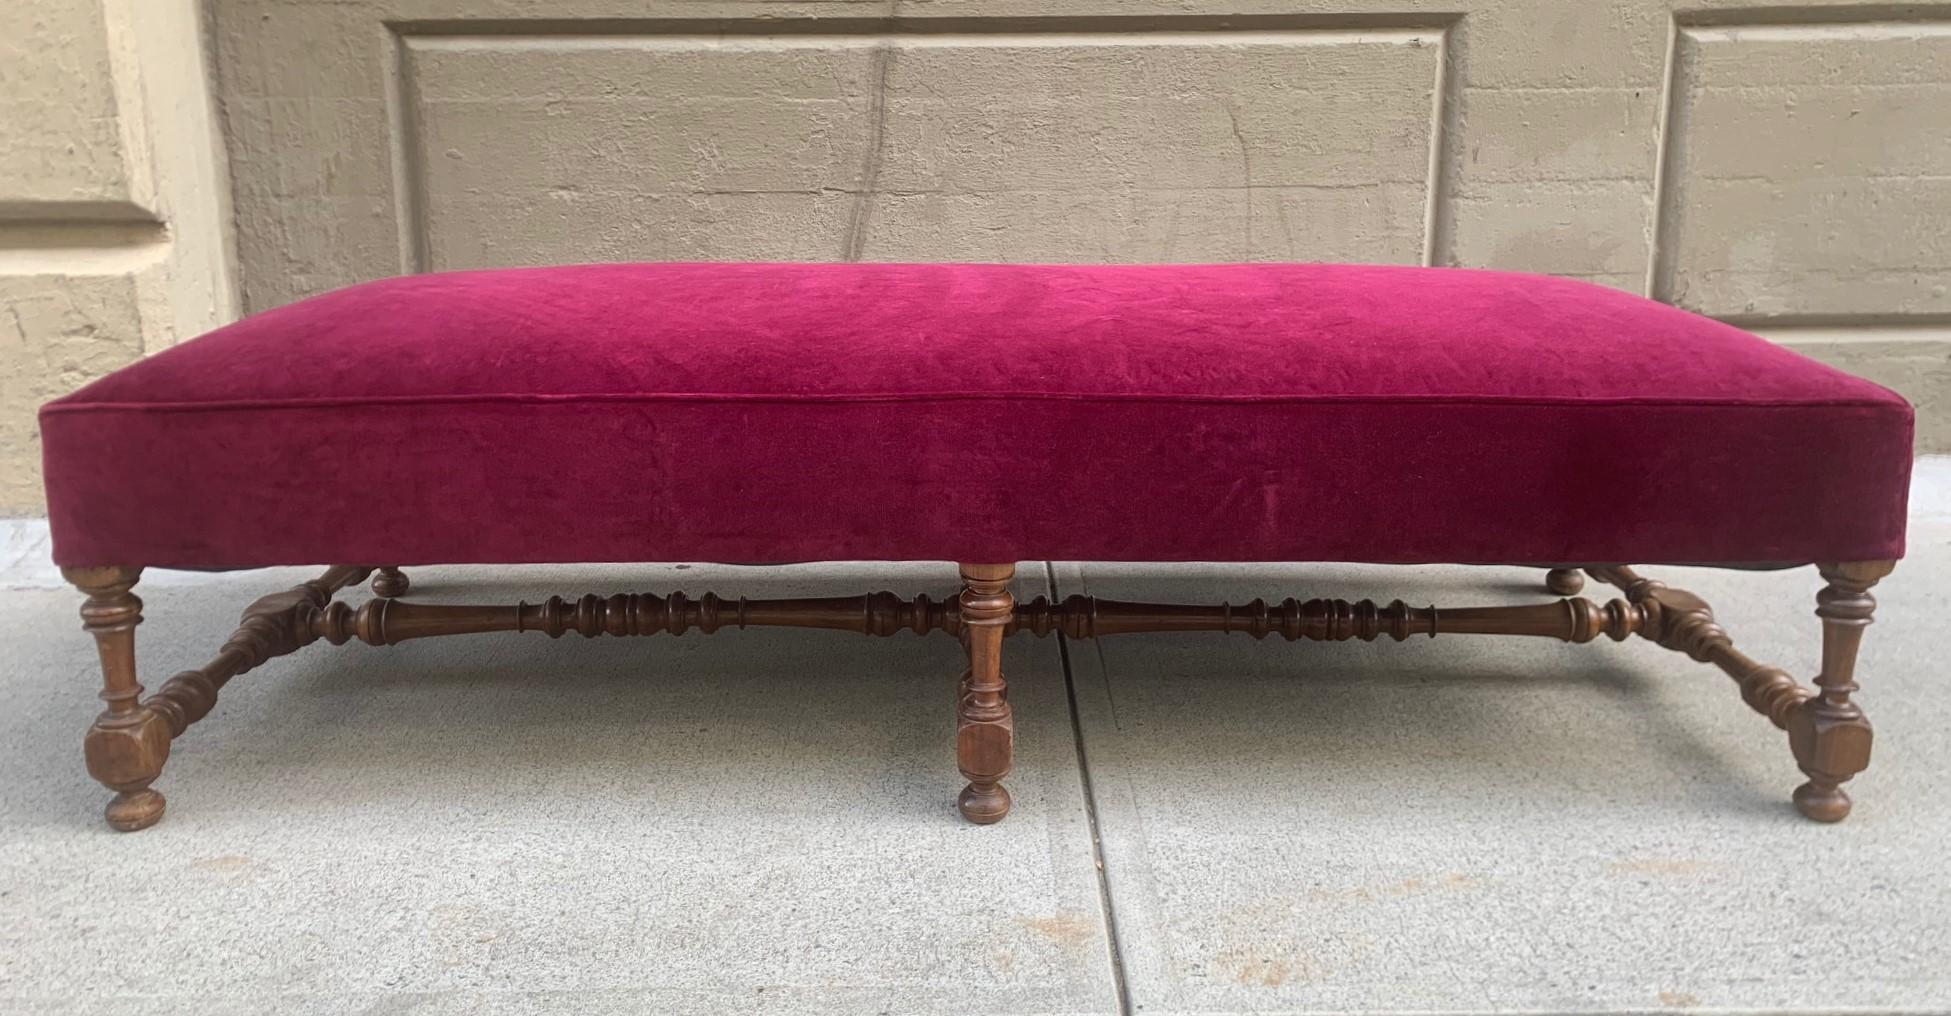 19th Century, Louis XIV style walnut carved bench with velvet upholstery. The bench has a solid walnut carved frame.